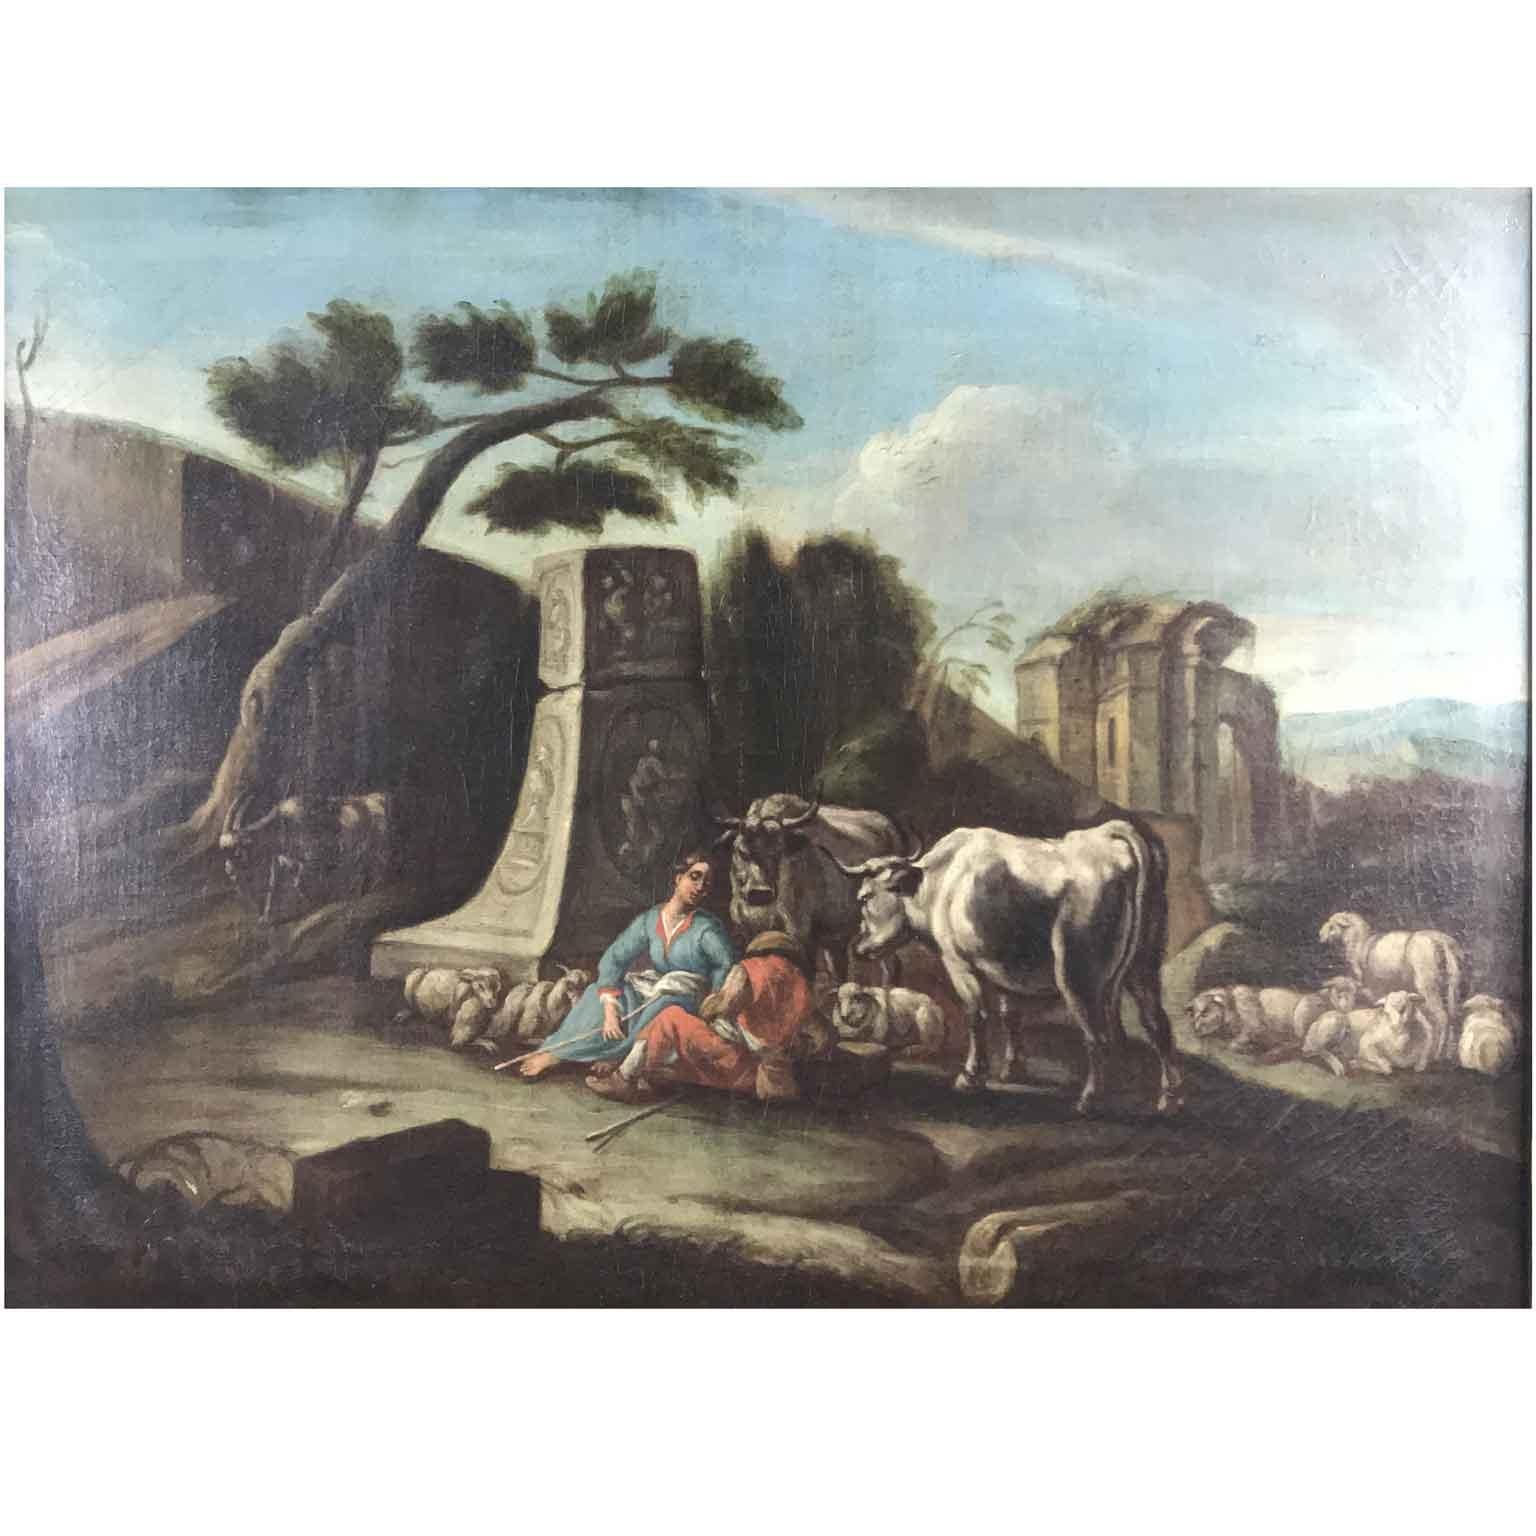 Antique Italian oil on canvas landscape with ruins, characters, and herds dating back to late 18th century, with original antique wooden frame, depicting two resting shepherds closed to ruins, a column with bas-relief decoration, cows, goats and